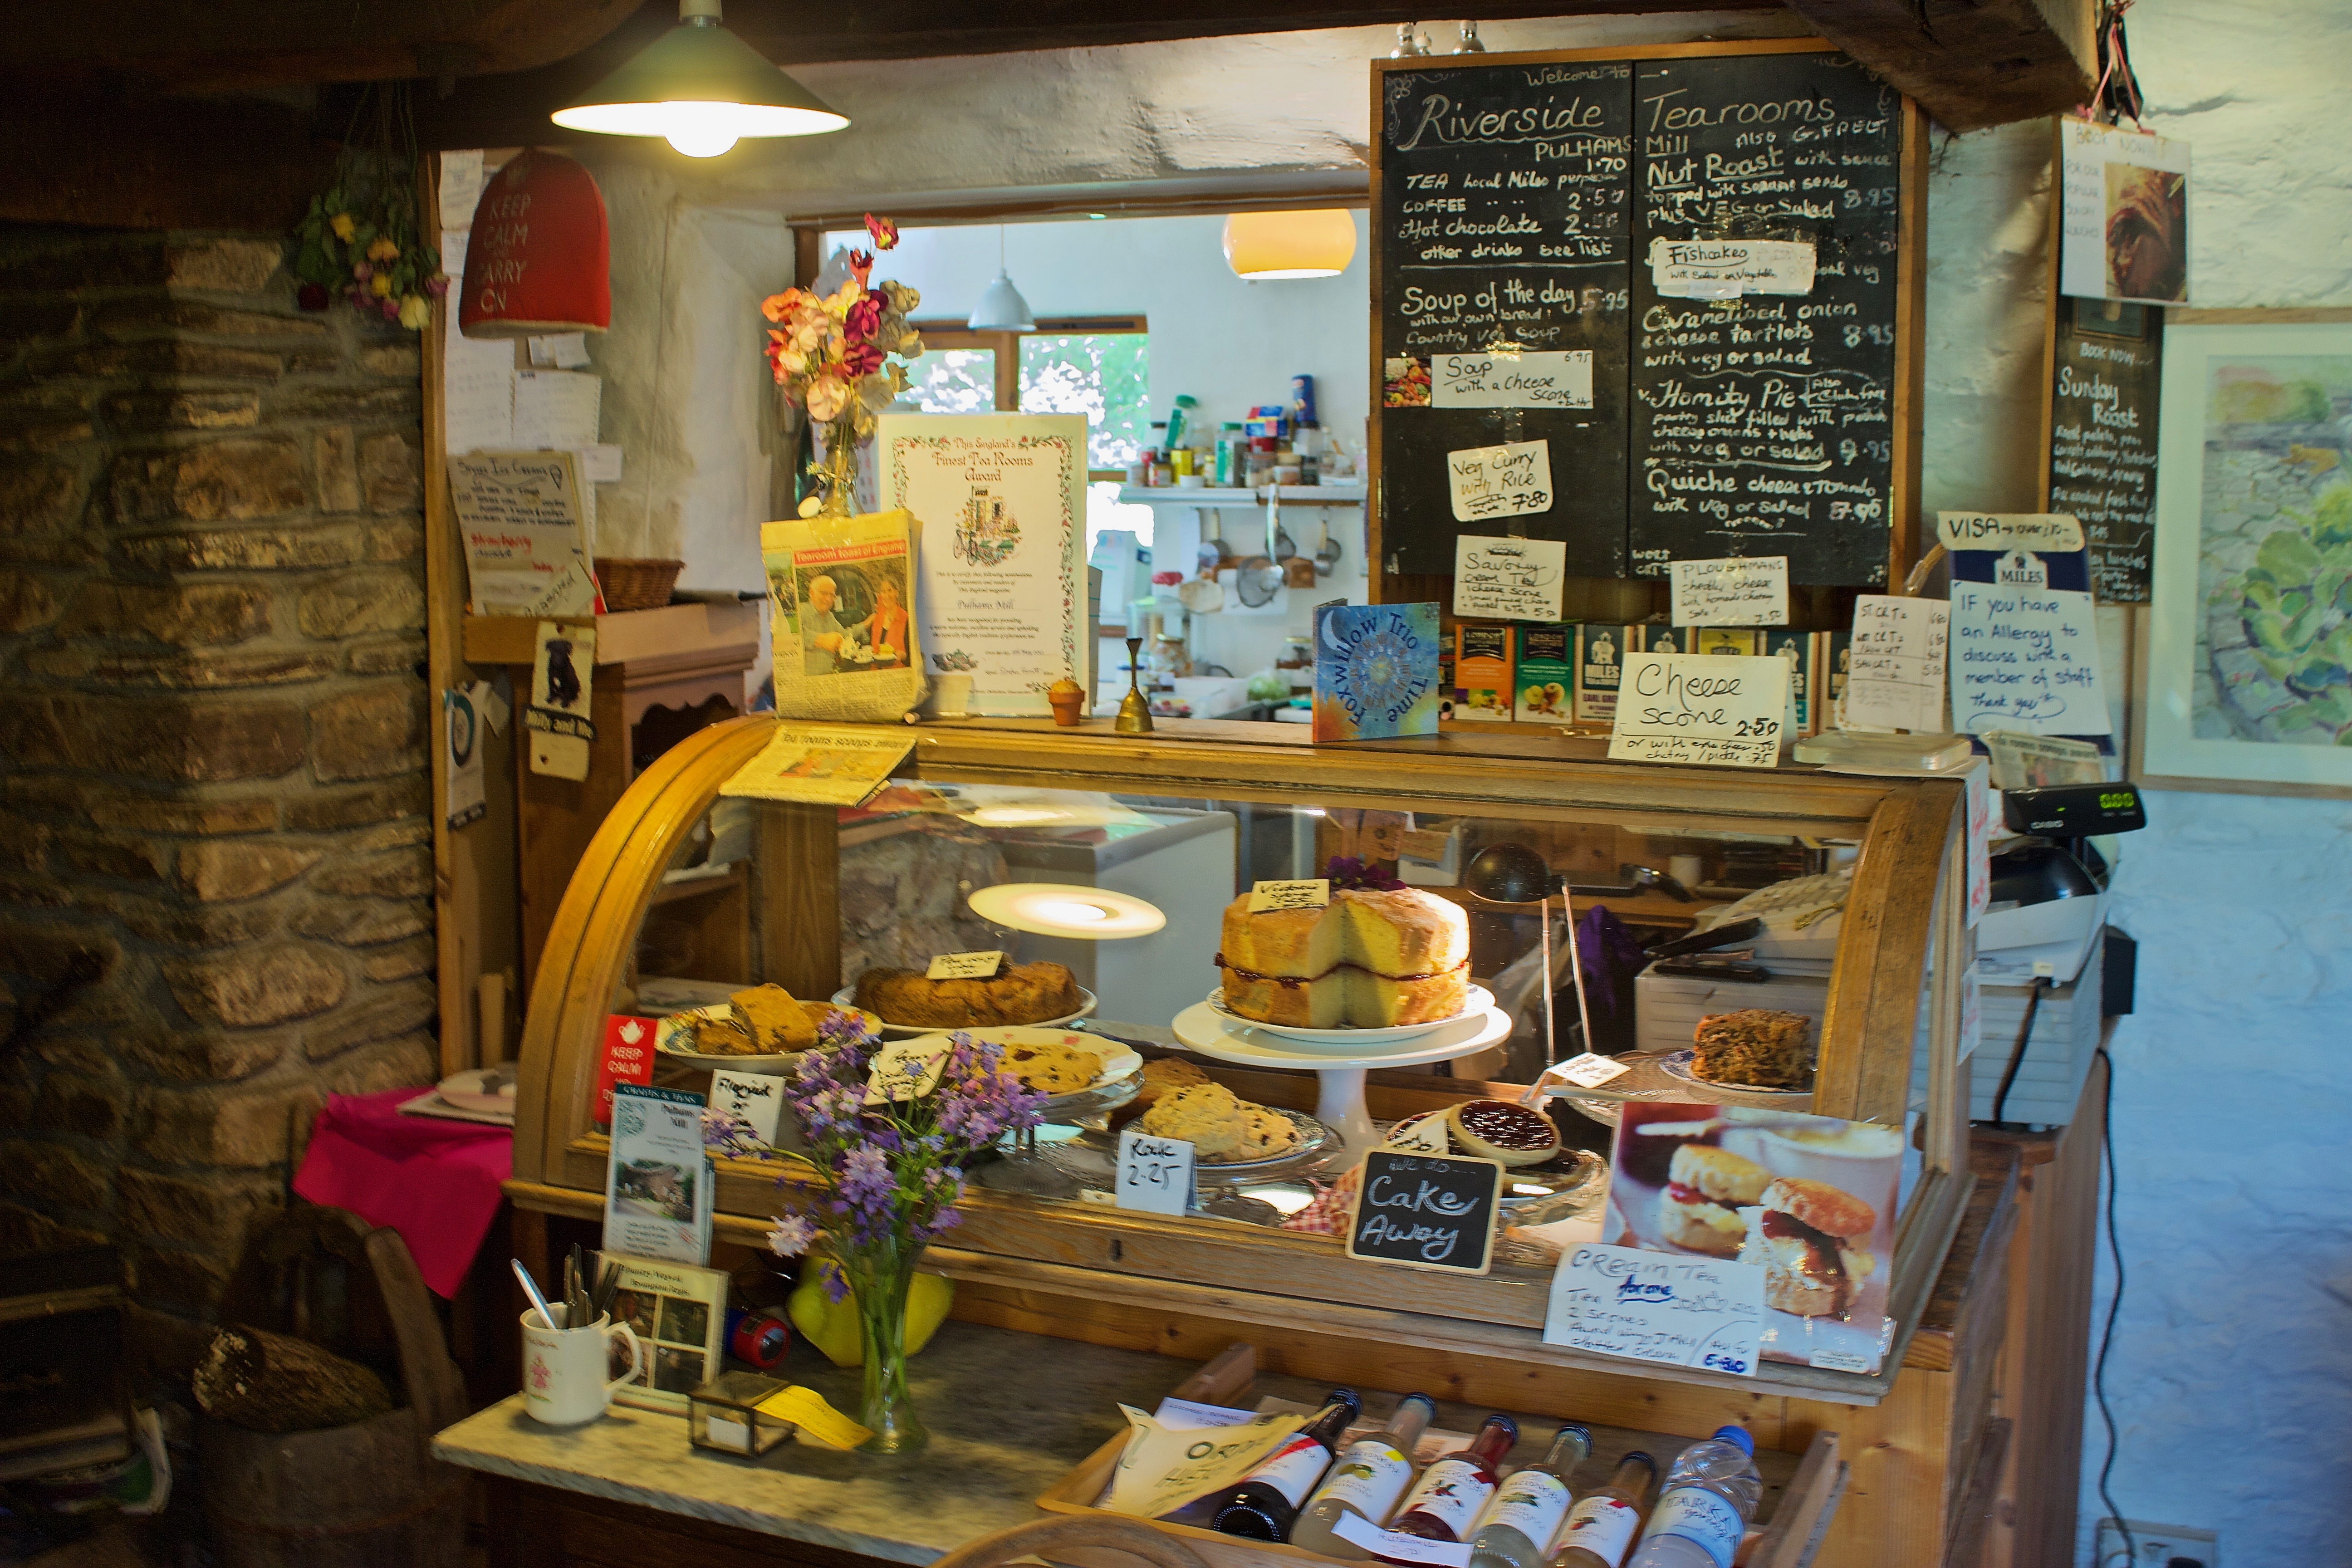 A display cabinet in an Exmoor tearooms featuring a range of scones,cakes, breads and pies. In the background are menu boards and price lists 